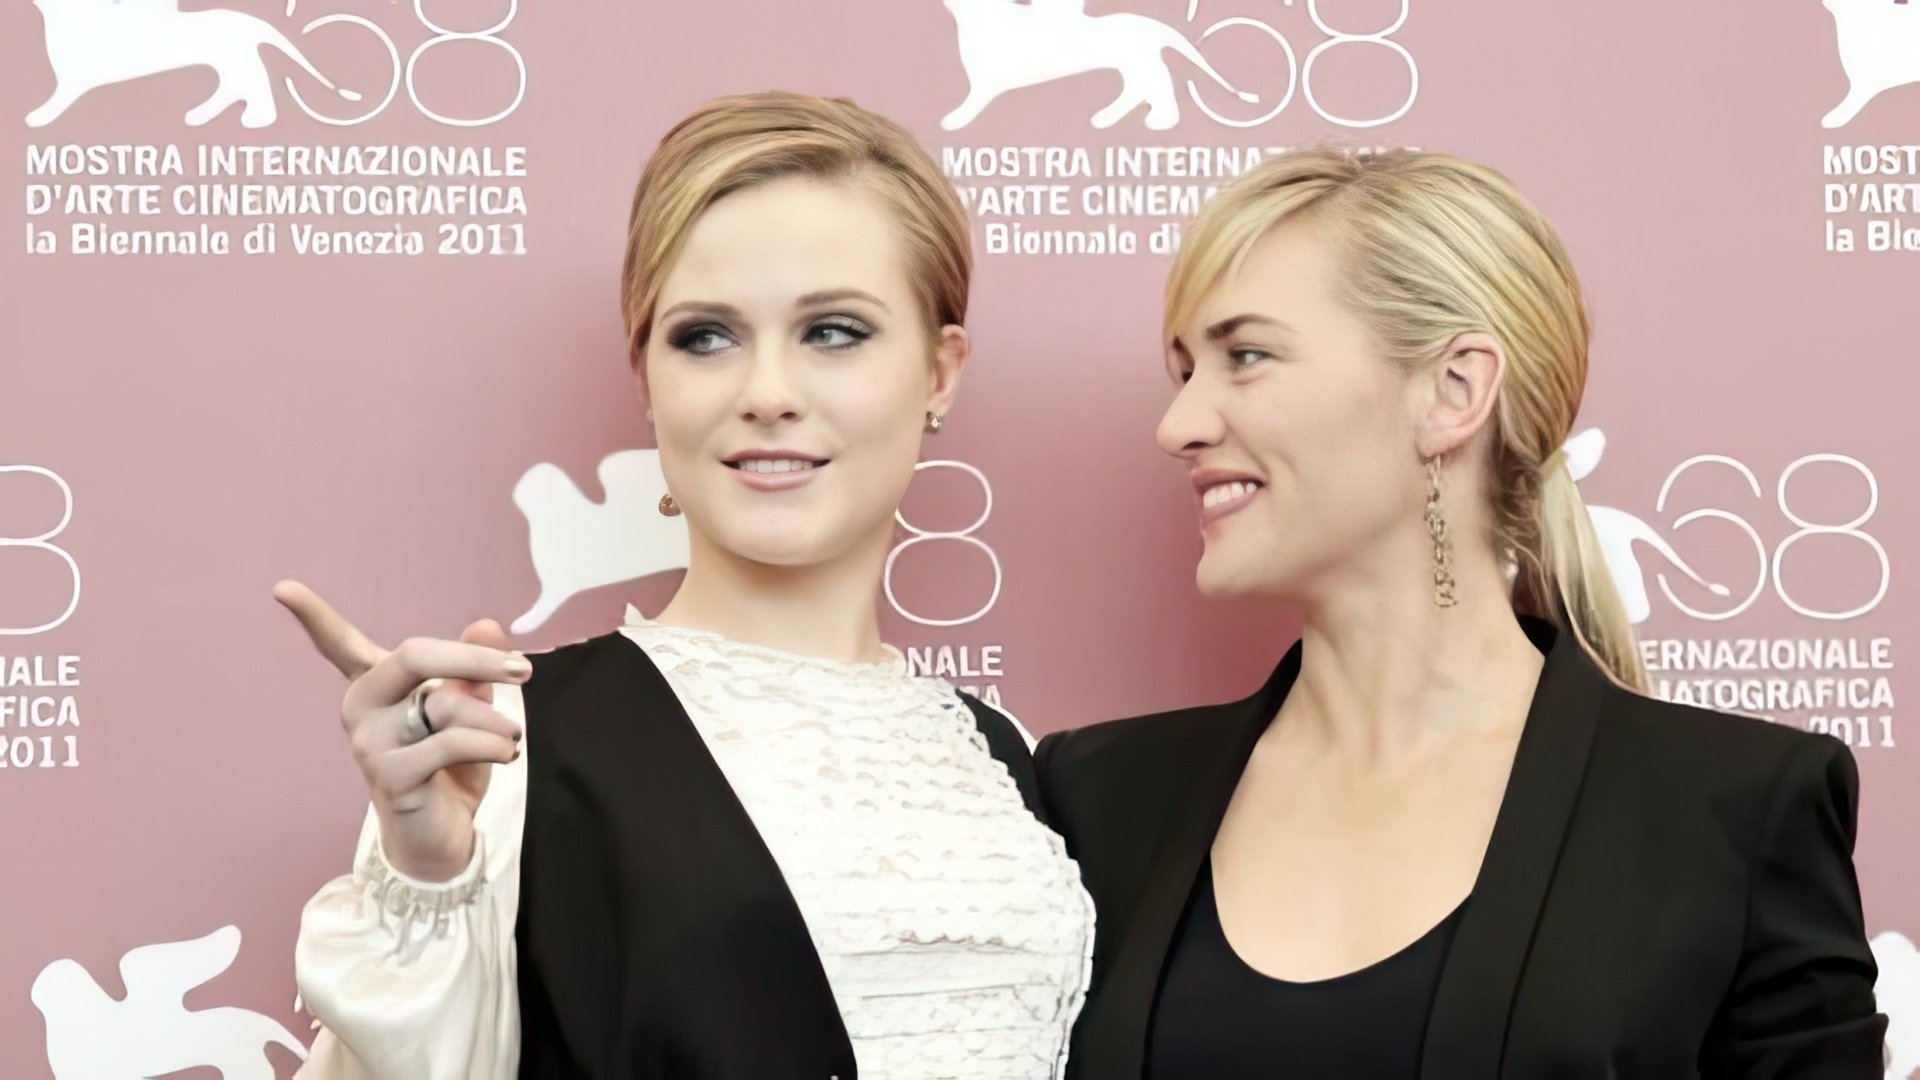 Evan Rachel Wood and Kate Winslet played together in a miniseries Mildred Pierce